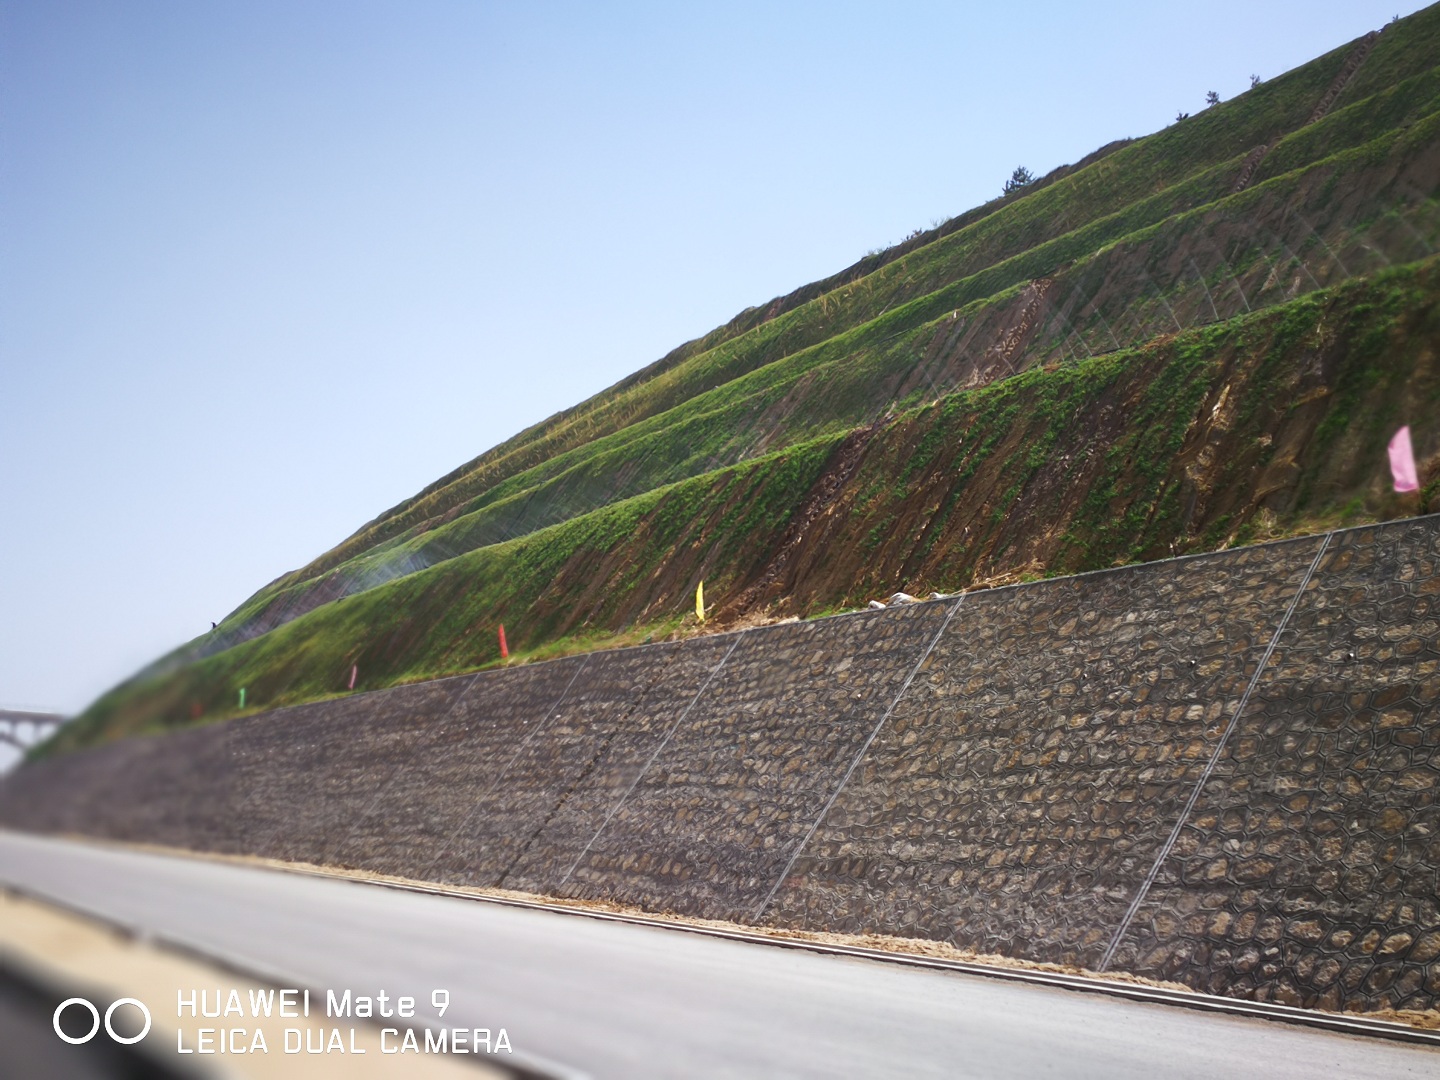 Building green highways and protecting the ecological environment